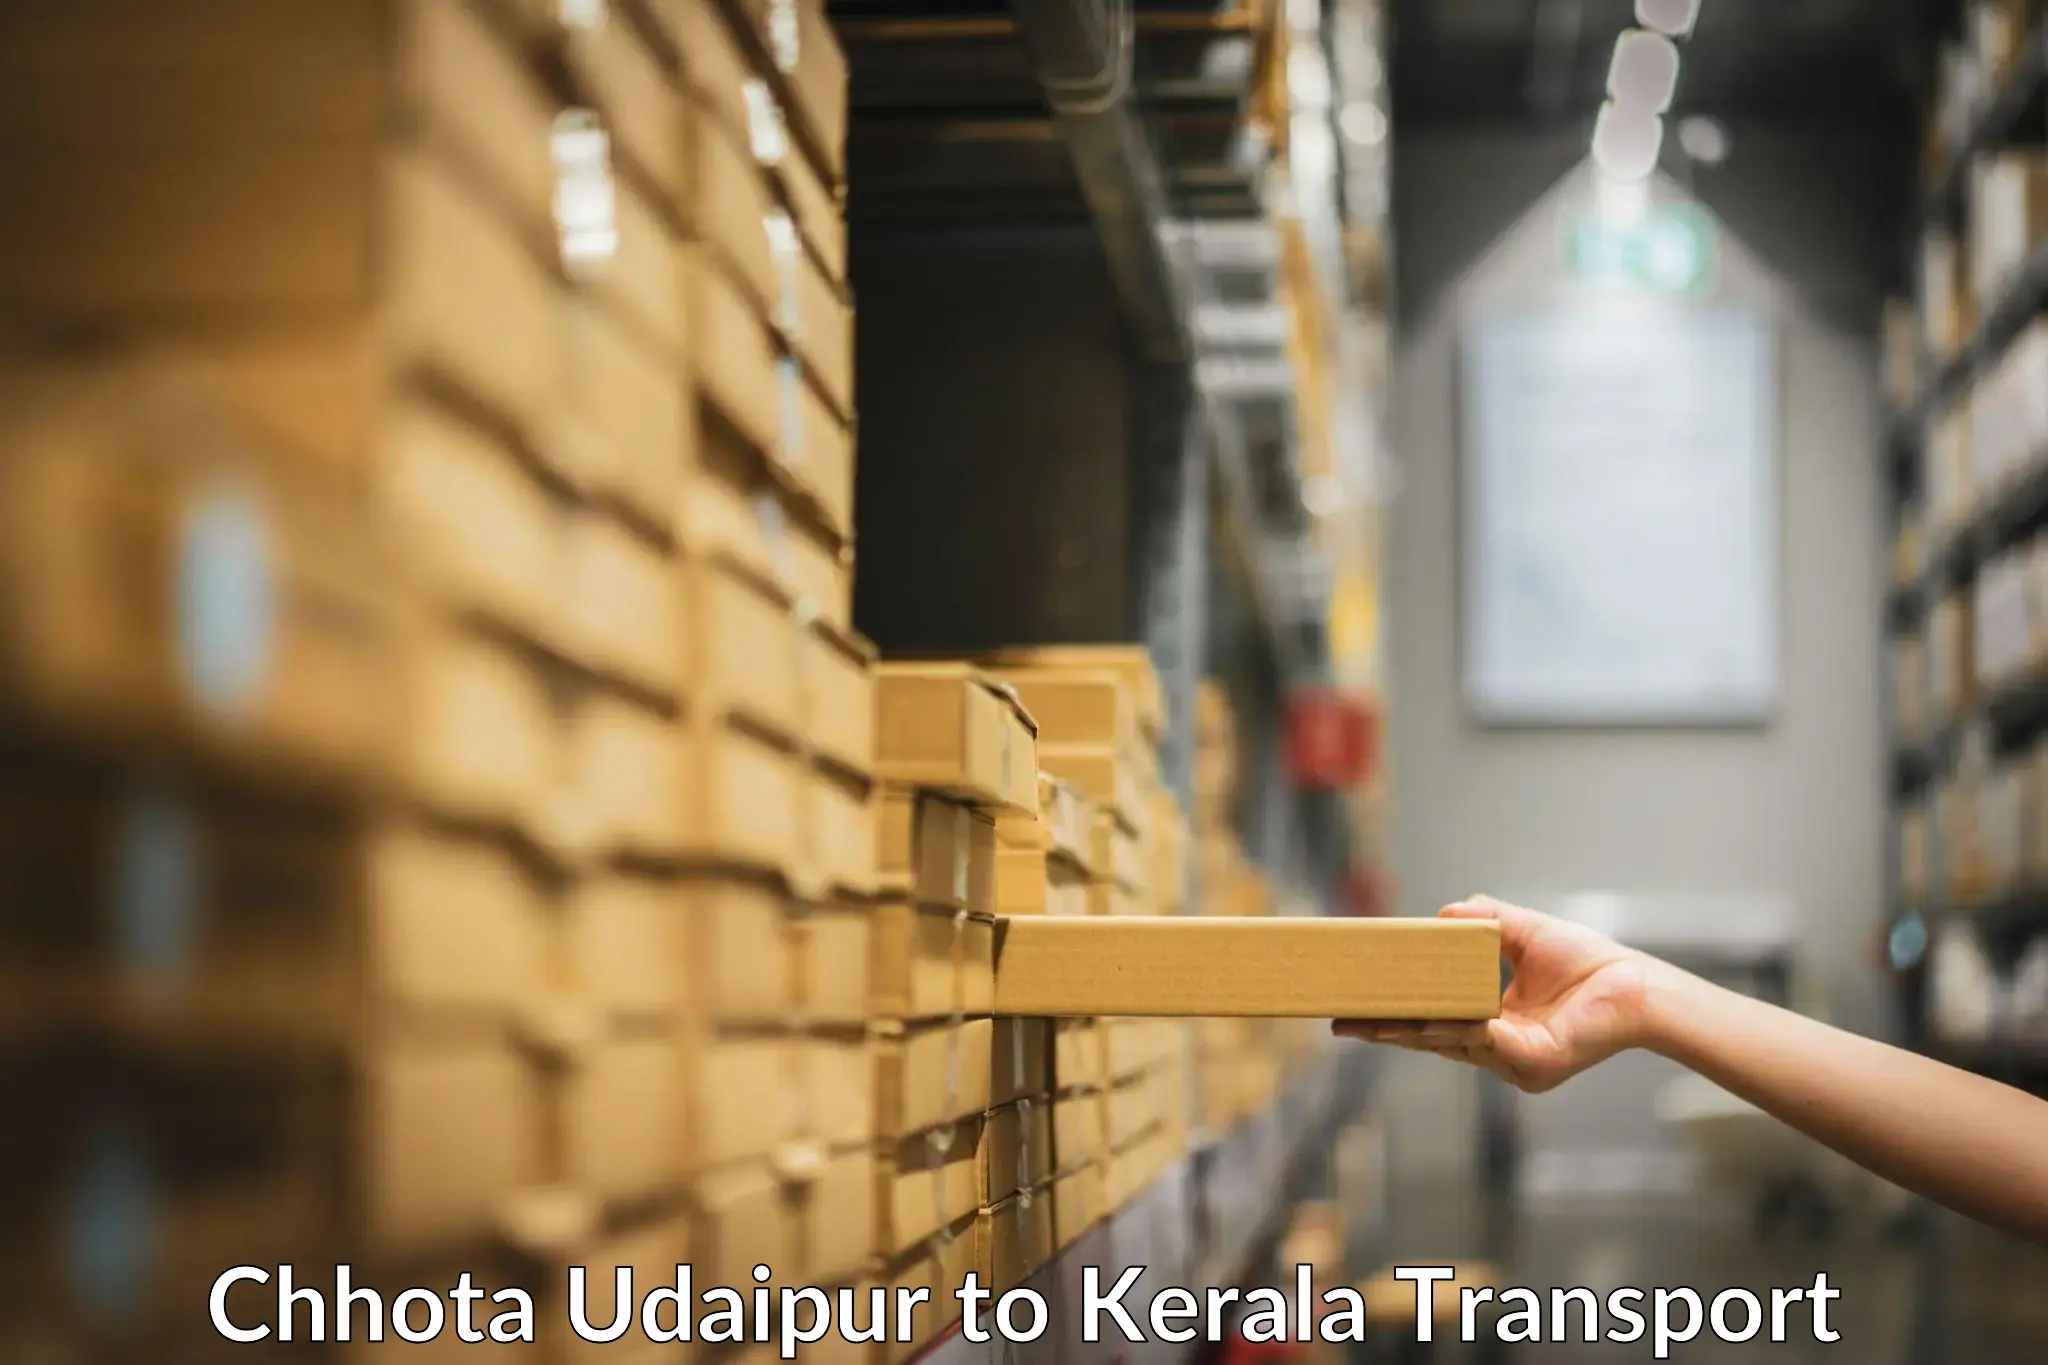 Truck transport companies in India Chhota Udaipur to Tirur